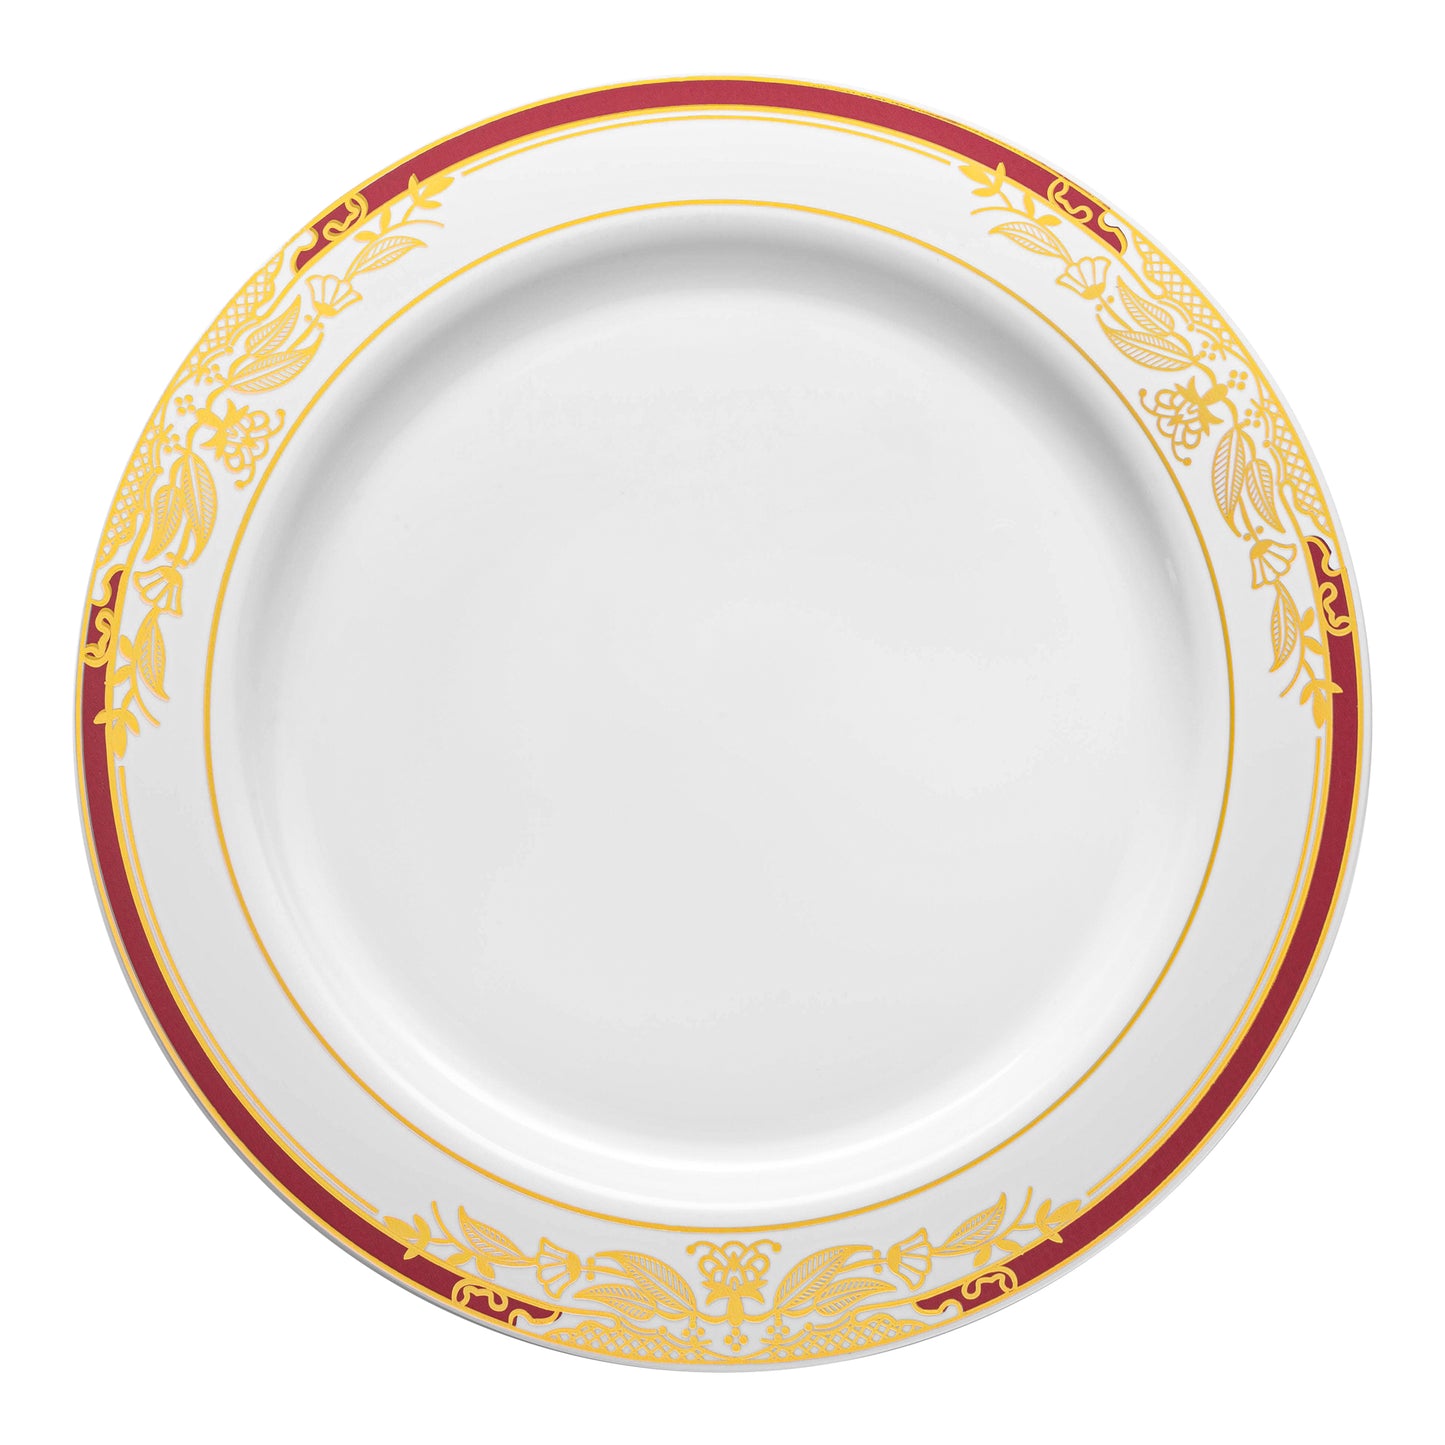 White with Burgundy and Gold Harmony Rim Plastic Appetizer/Salad Plates (7.5") | The Kaya Collection